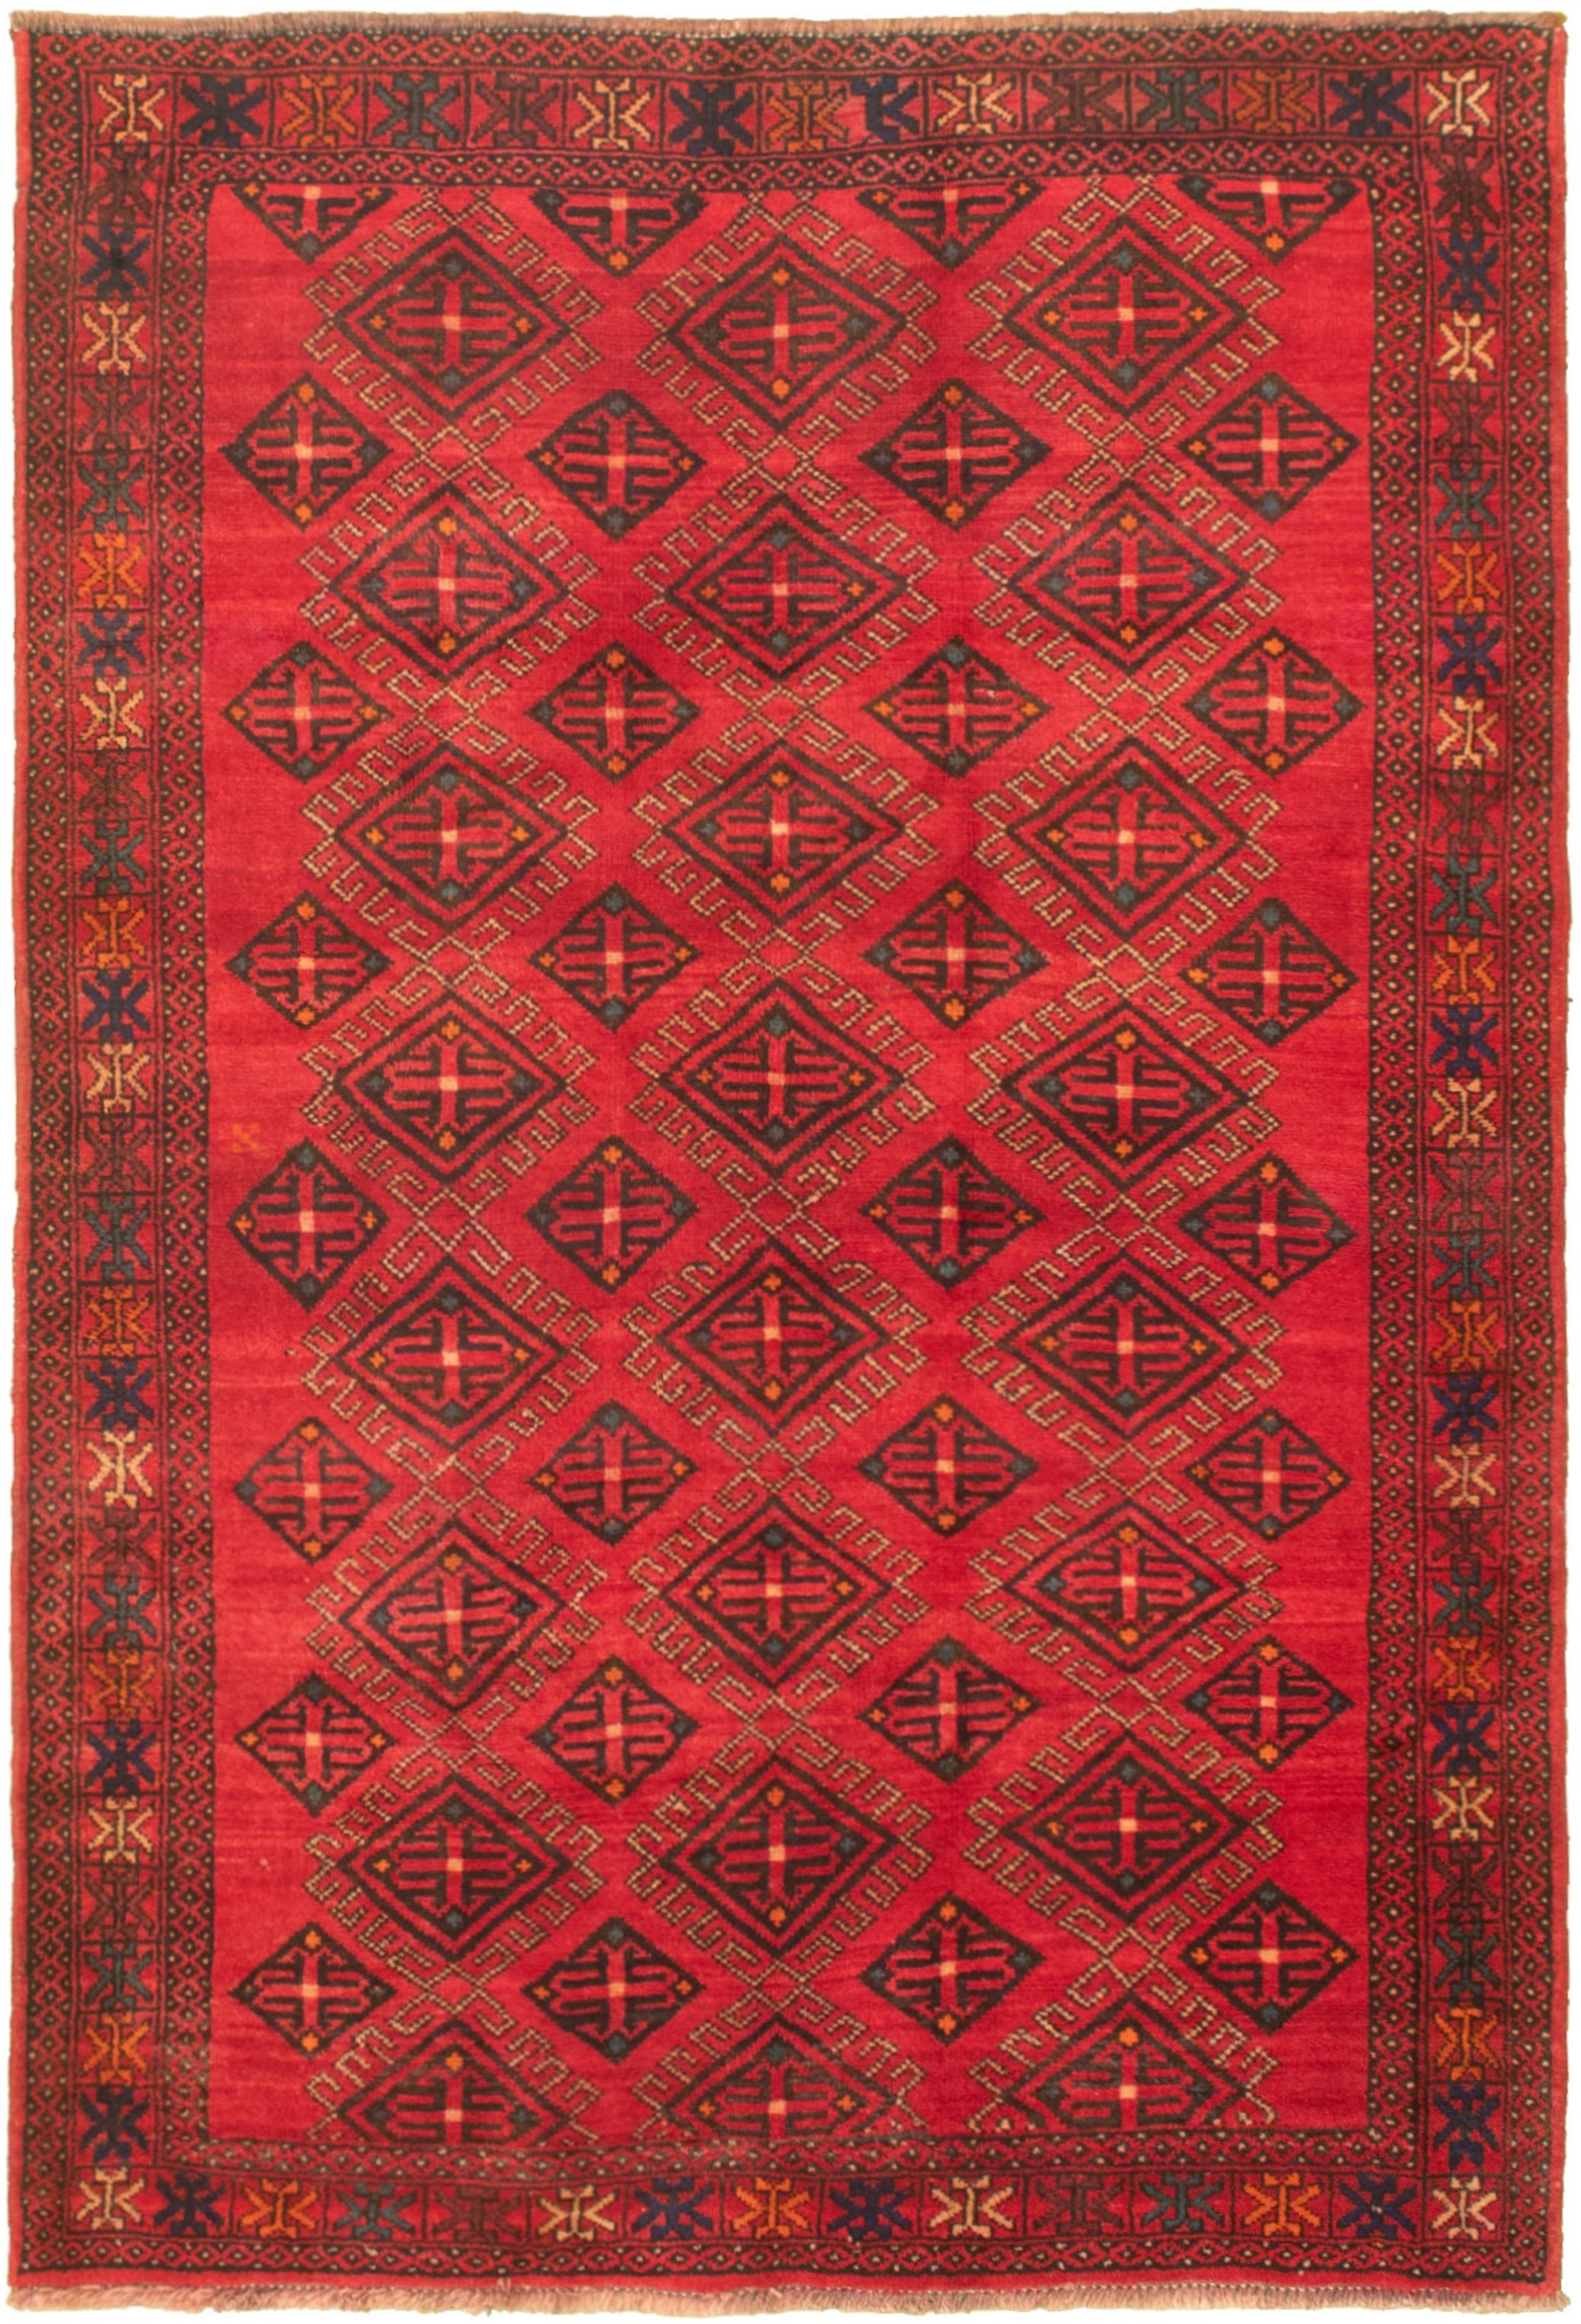 Hand-knotted Authentic Turkish Red Wool Rug 5'2" x 7'11" Size: 5'2" x 7'11"  